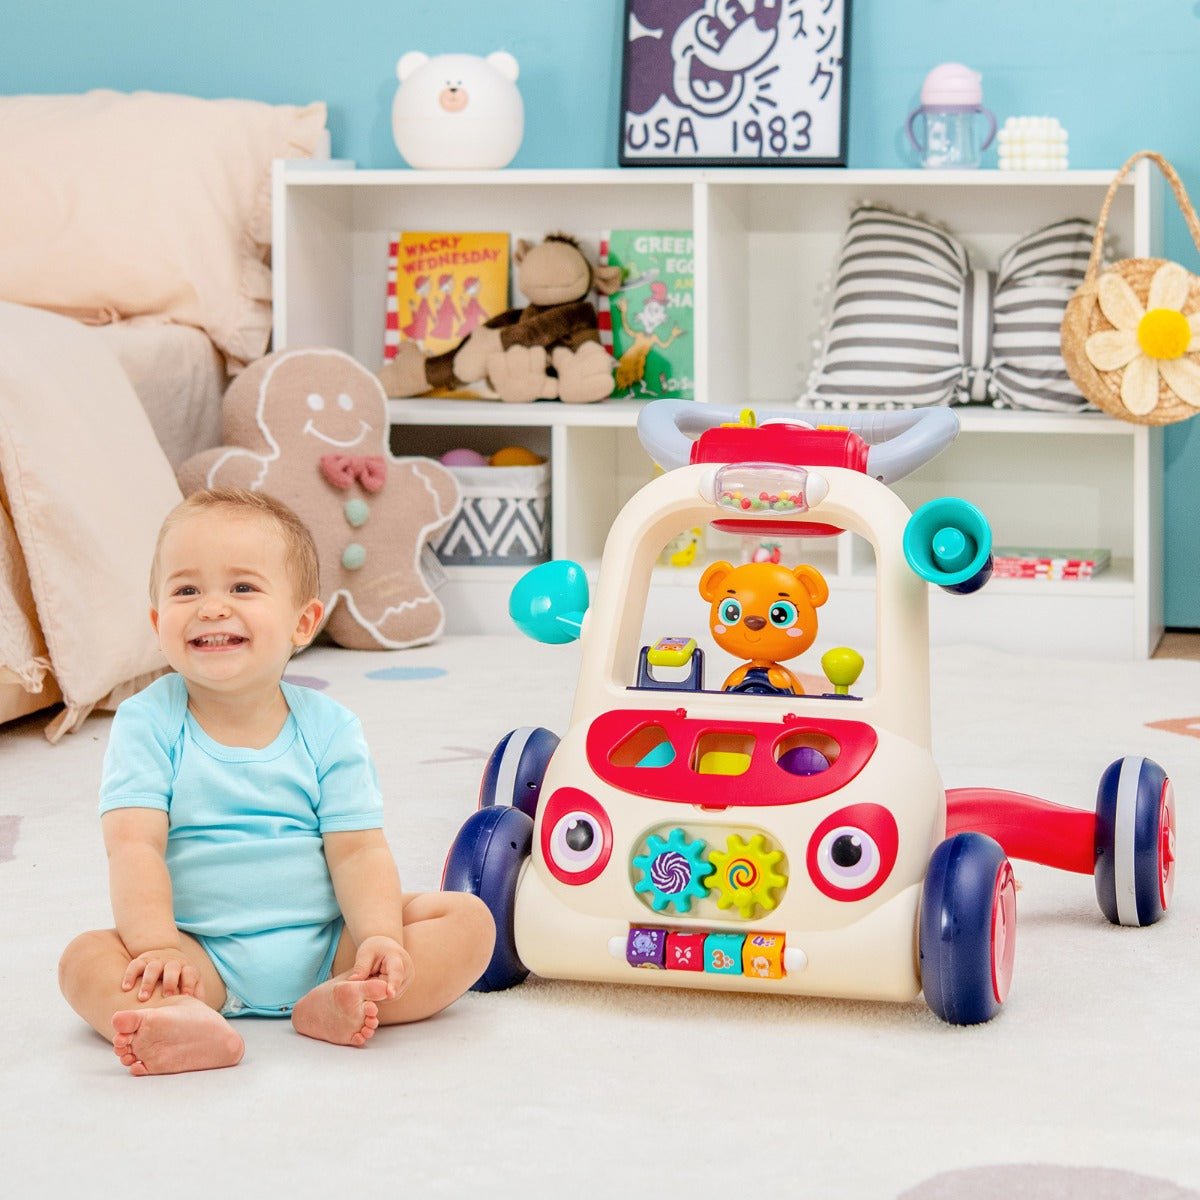 Educational 2-in-1 Baby Walker: Toddler Toy with Music and Light for Over 9 Months